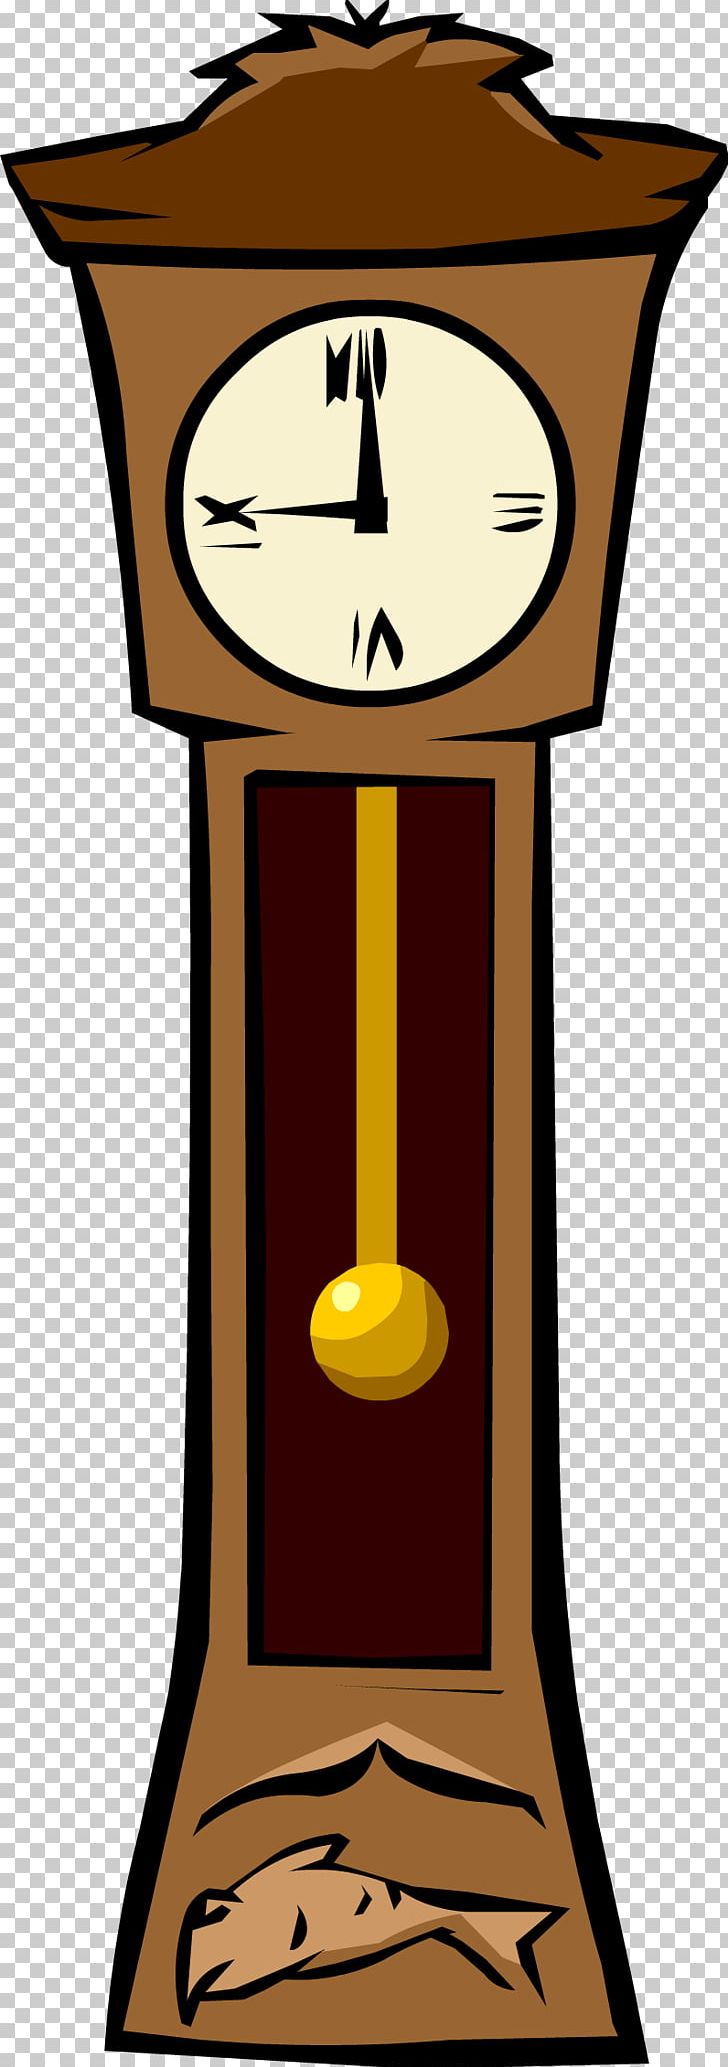 Club Penguin Floor & Grandfather Clocks PNG, Clipart, Cartoon, Clock, Club Penguin, Floor Grandfather Clocks, Free Content Free PNG Download